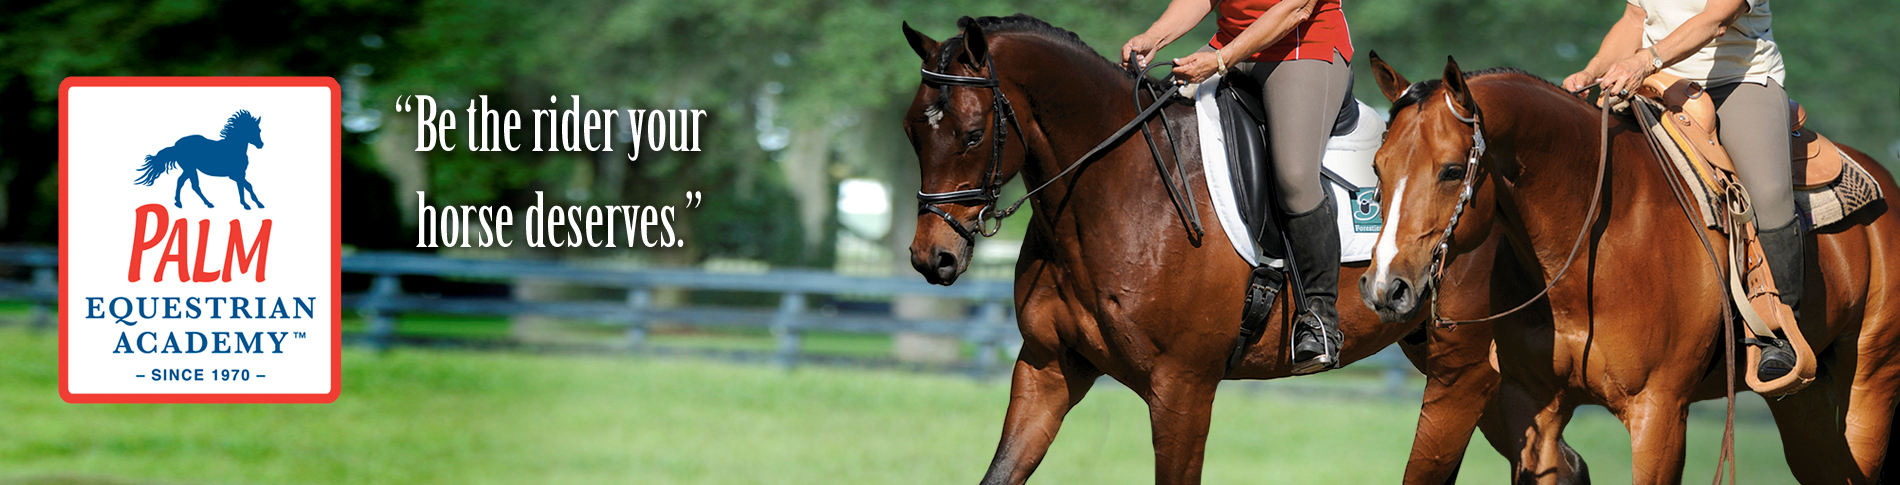 Exercises for Equestrians - Part 3